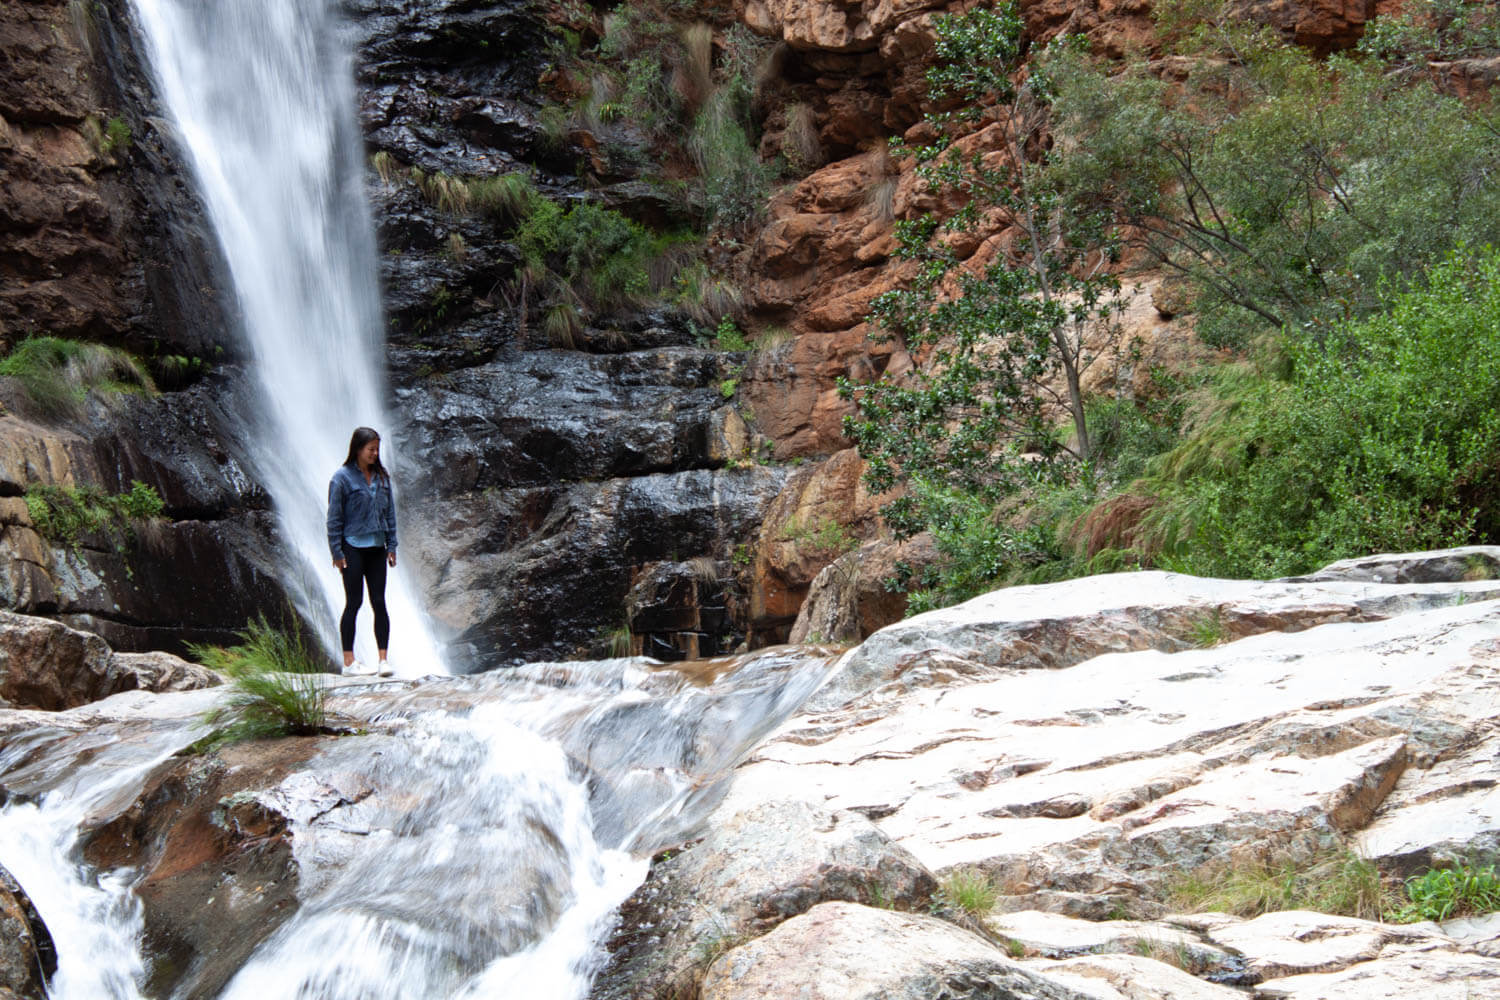 Close up of Kim in front of Meiringspoort Waterfall